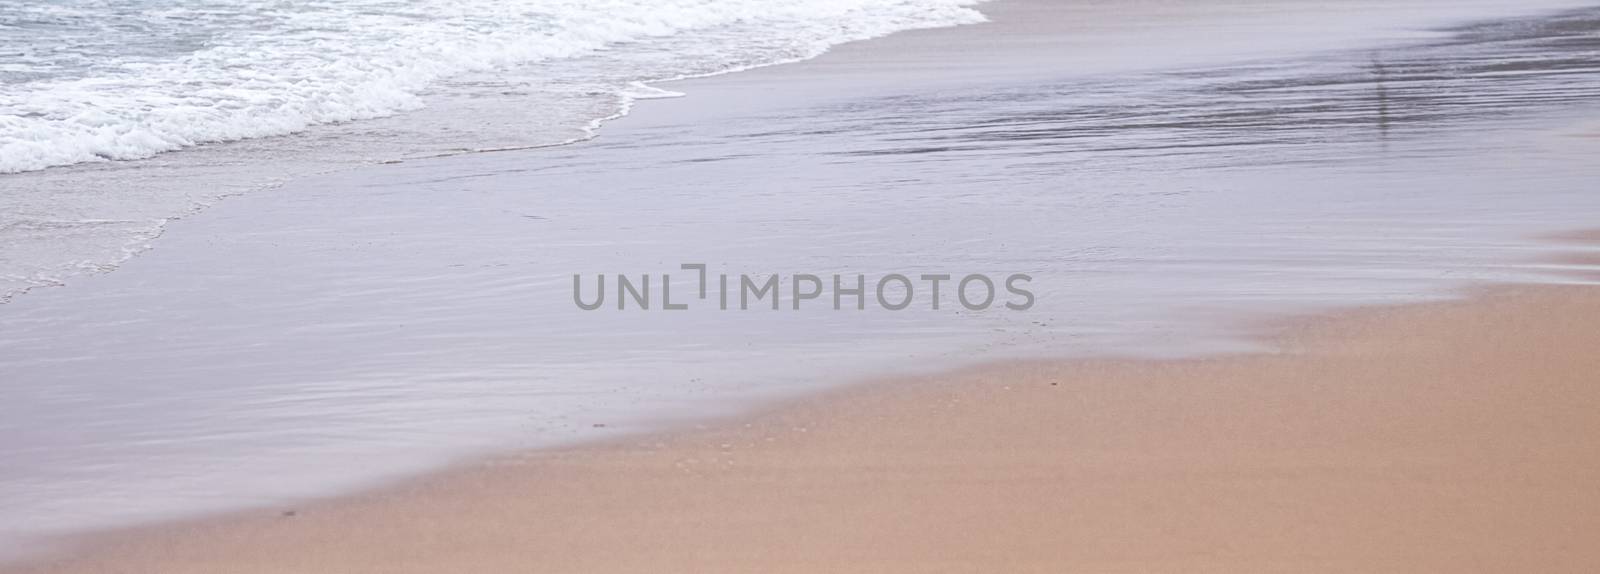 Beautiful sea or ocean waves, coast view from tropical sand beach, summer vacation travel and holiday destination scene